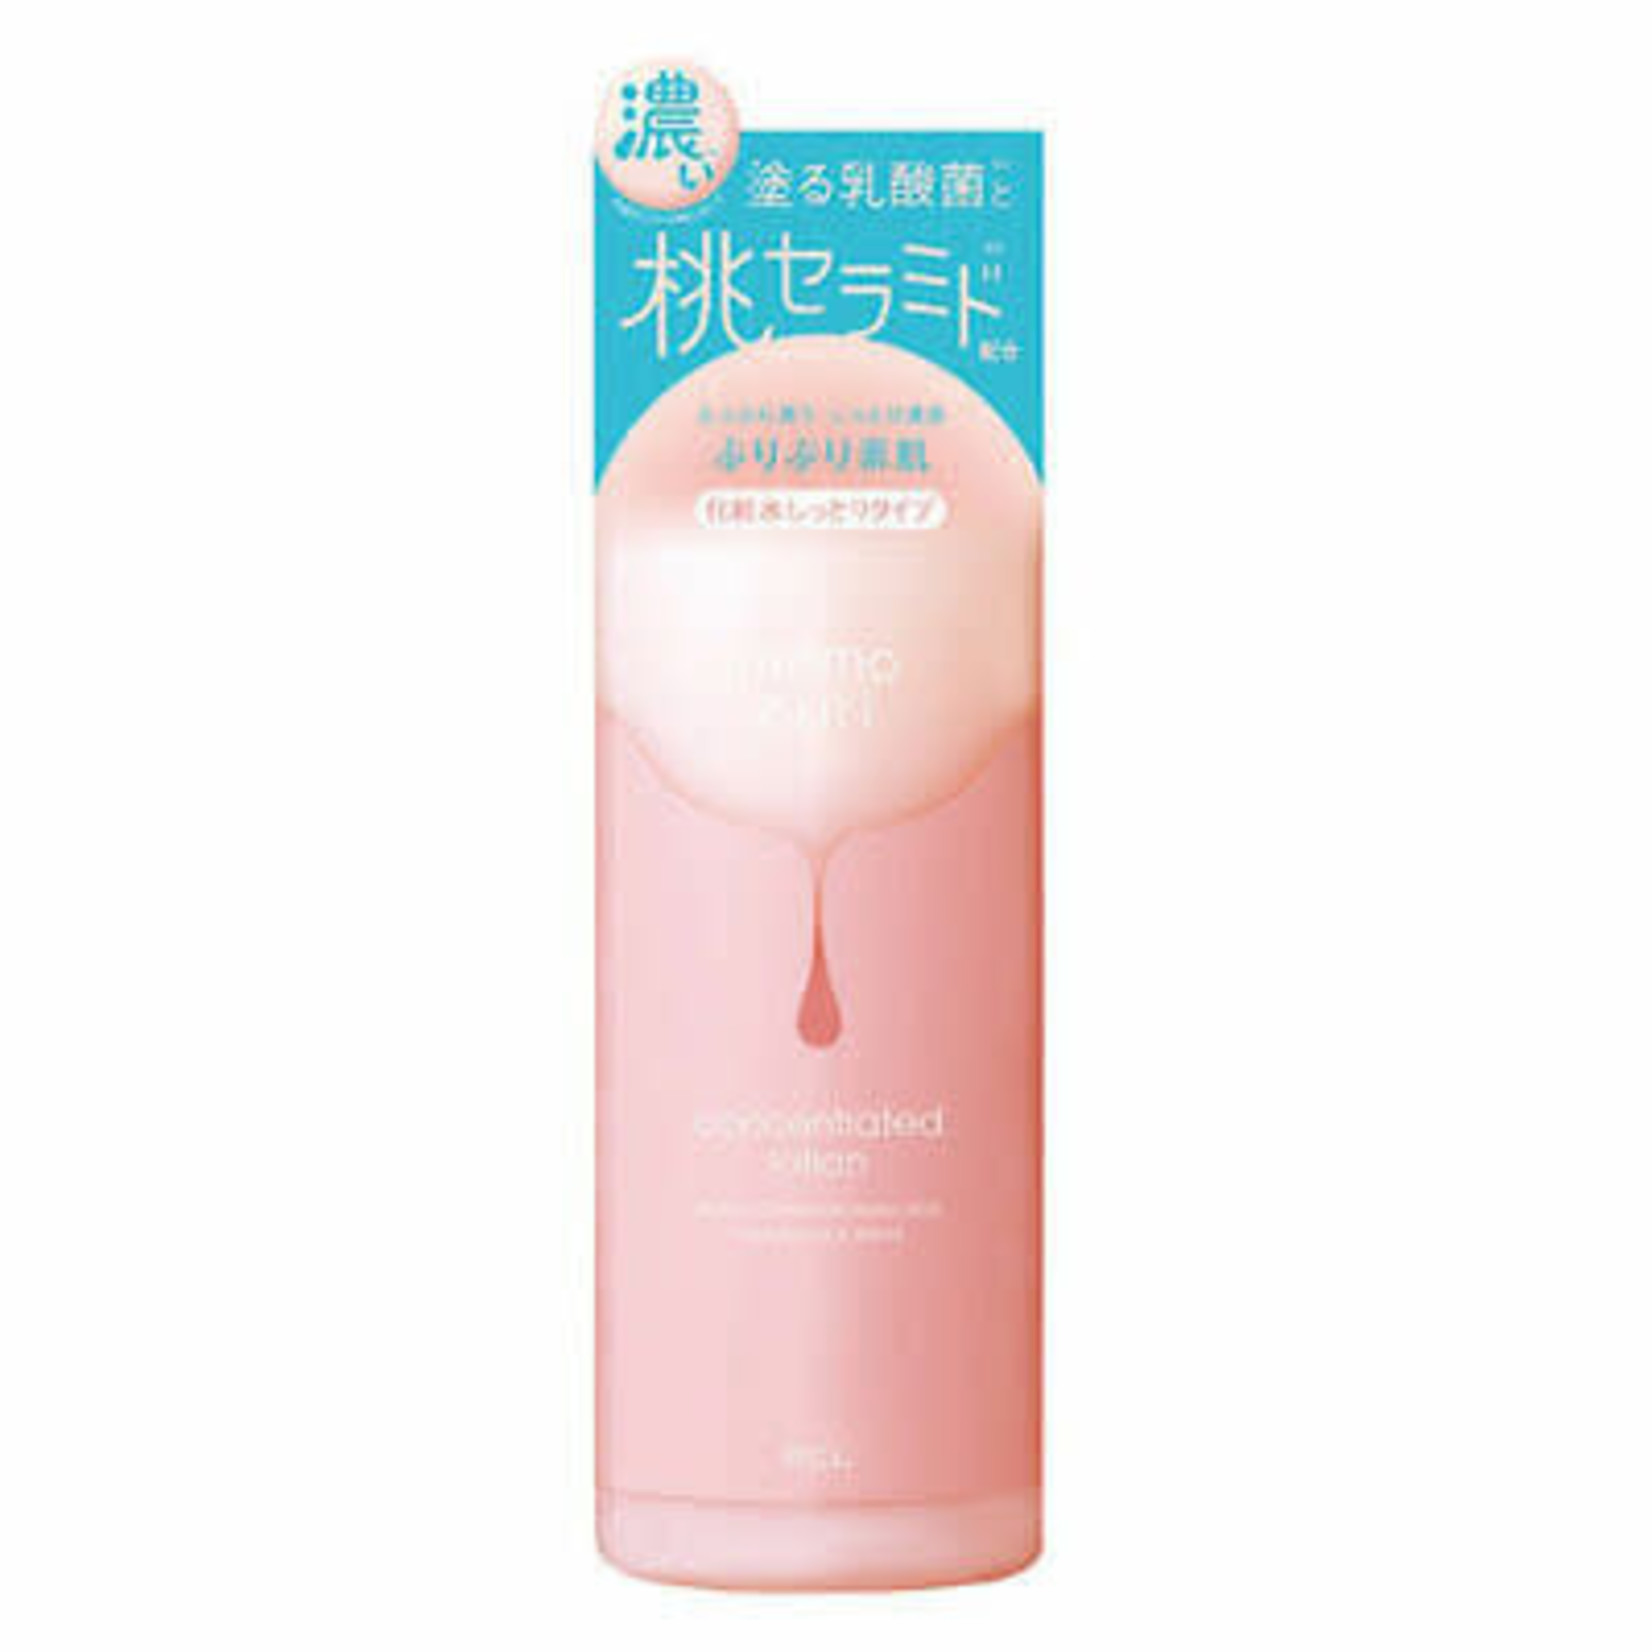 BCL BCL Momo Puri Concentrated Lotion 200ml